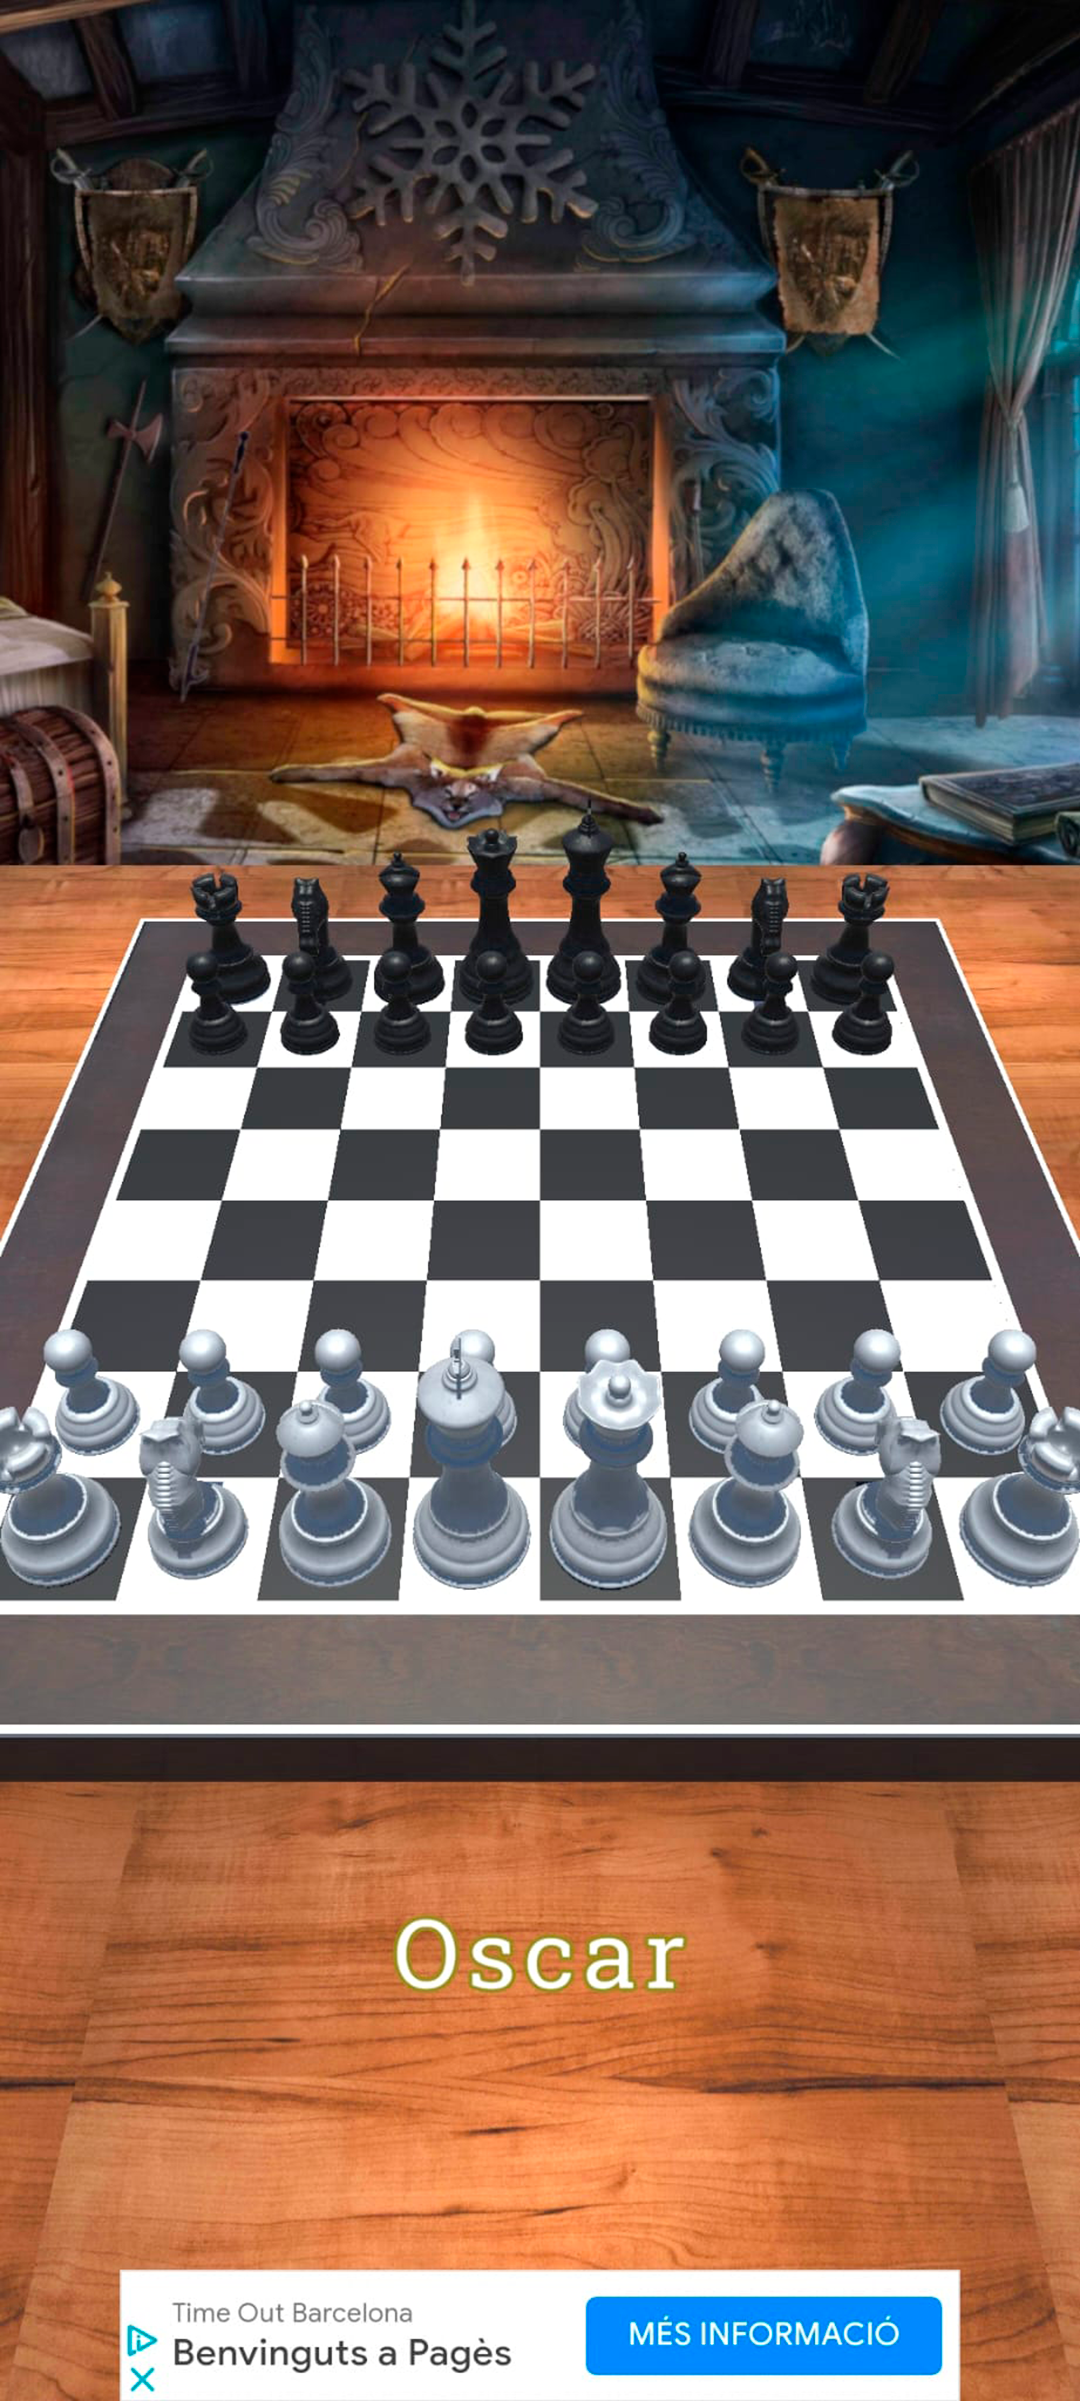 Real Chess Master 3D